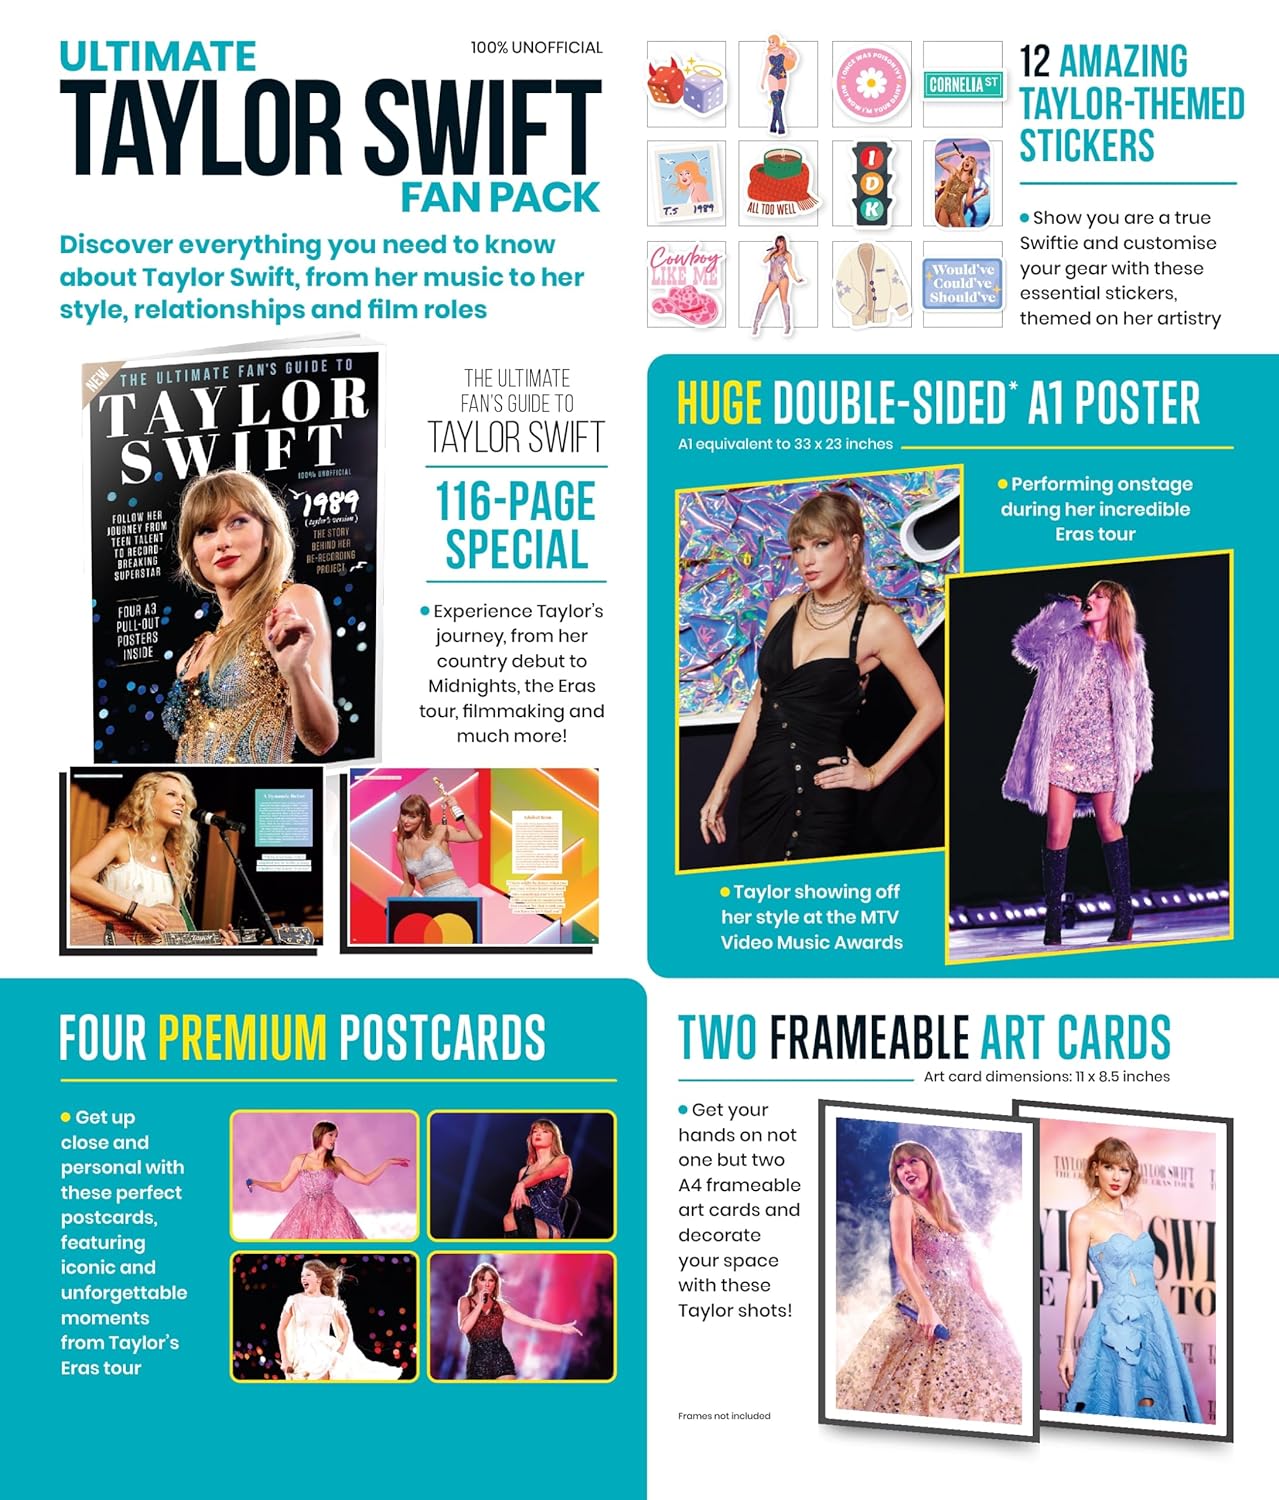 Taylor Swift The Ultimate Fan Pack - Zhivago Gifts